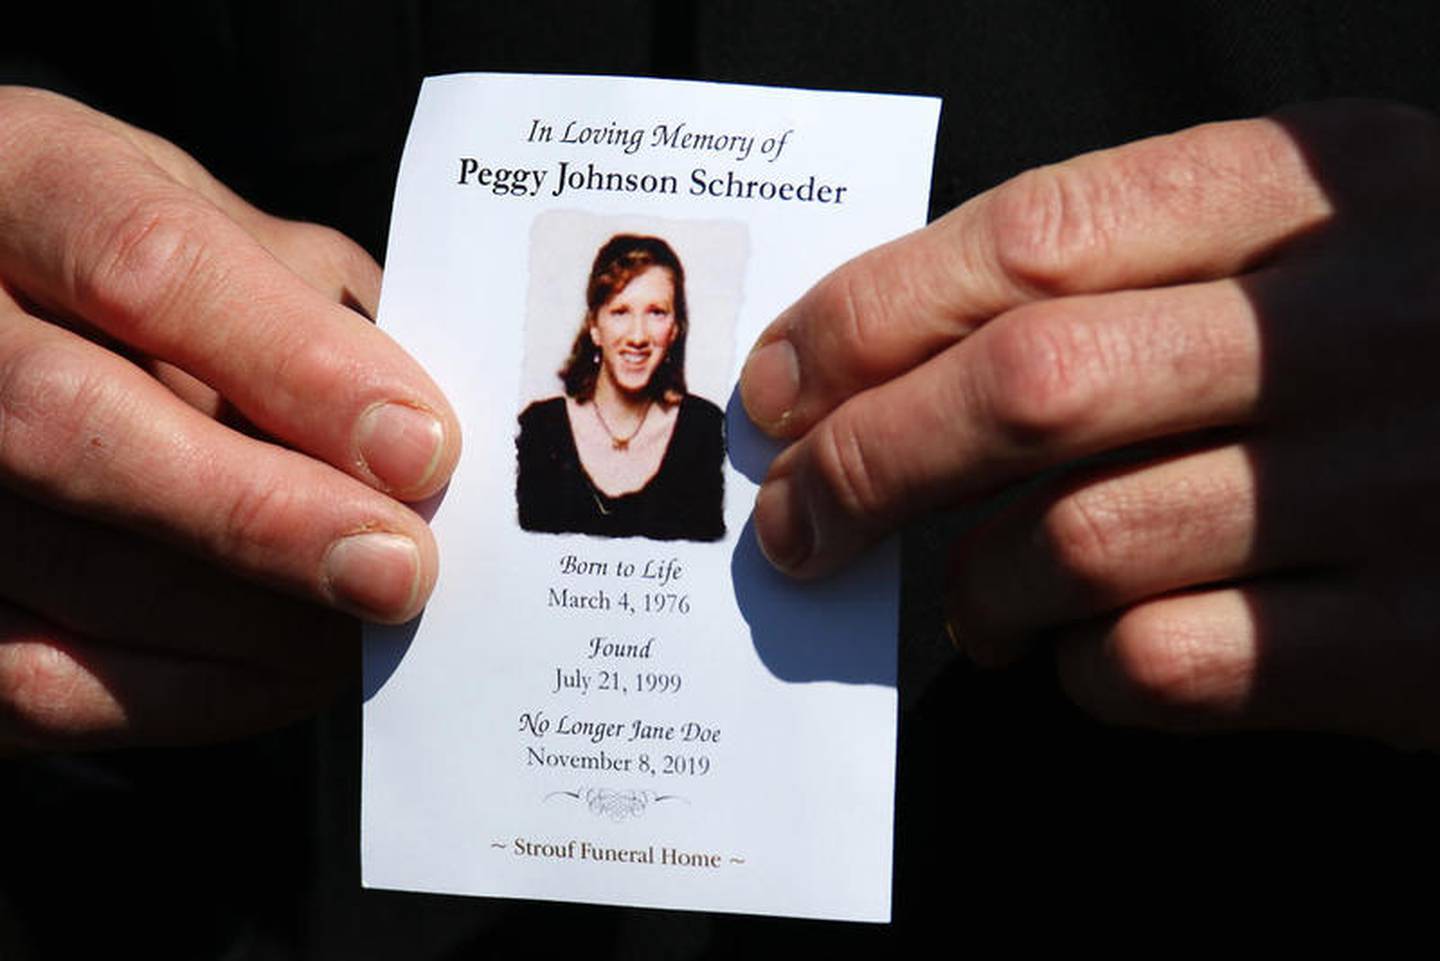 Racine County Sheriff Christopher Schmaling holds a prayer card for Peggy Lynn Johnson-Schroeder after a reburial service on her birthday at a plot next to her mother on Wednesday at Highland Gardens of Memories in Belvidere. Peggy Lynn Johnson-Schroeder was found dead at 23 years old in Racine in 1999 and was unidentified, known only as Jane Doe, until this past November when Linda La Roche was arrested in Cape Coral, Florida, for her murder.